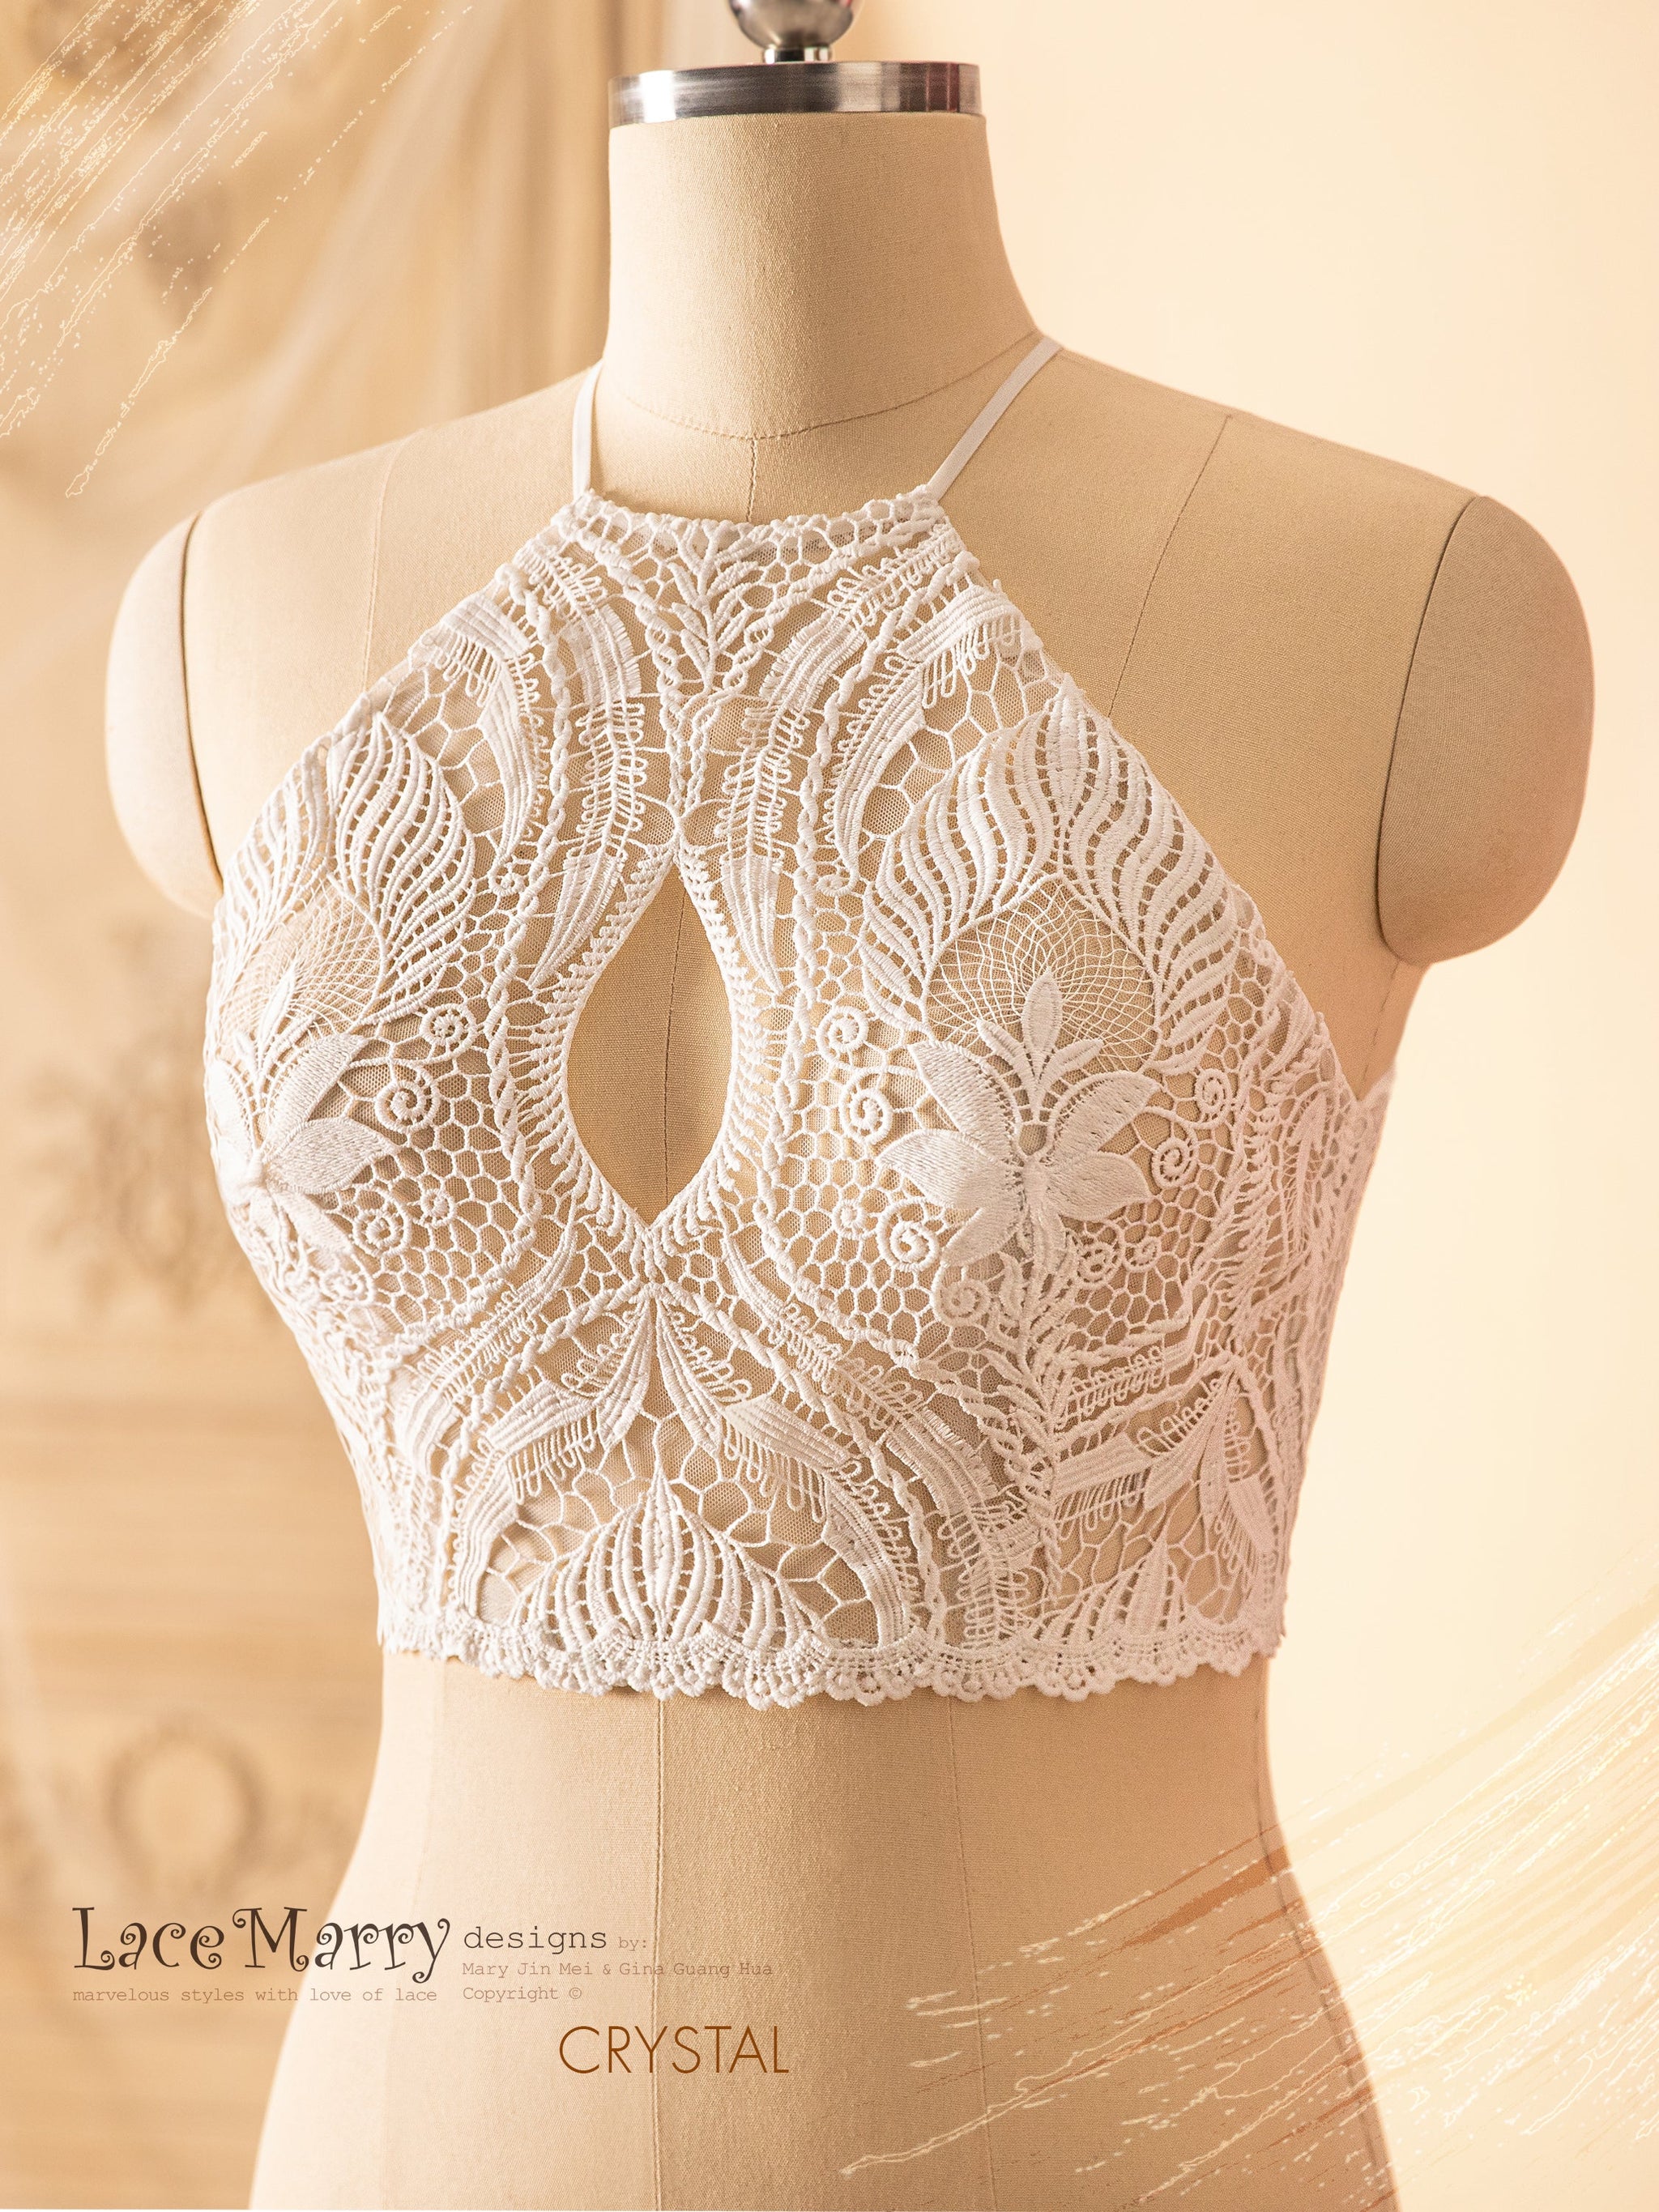 CRYSTAL / Bridal Boho Lace Top from Macrame Lace - LaceMarry